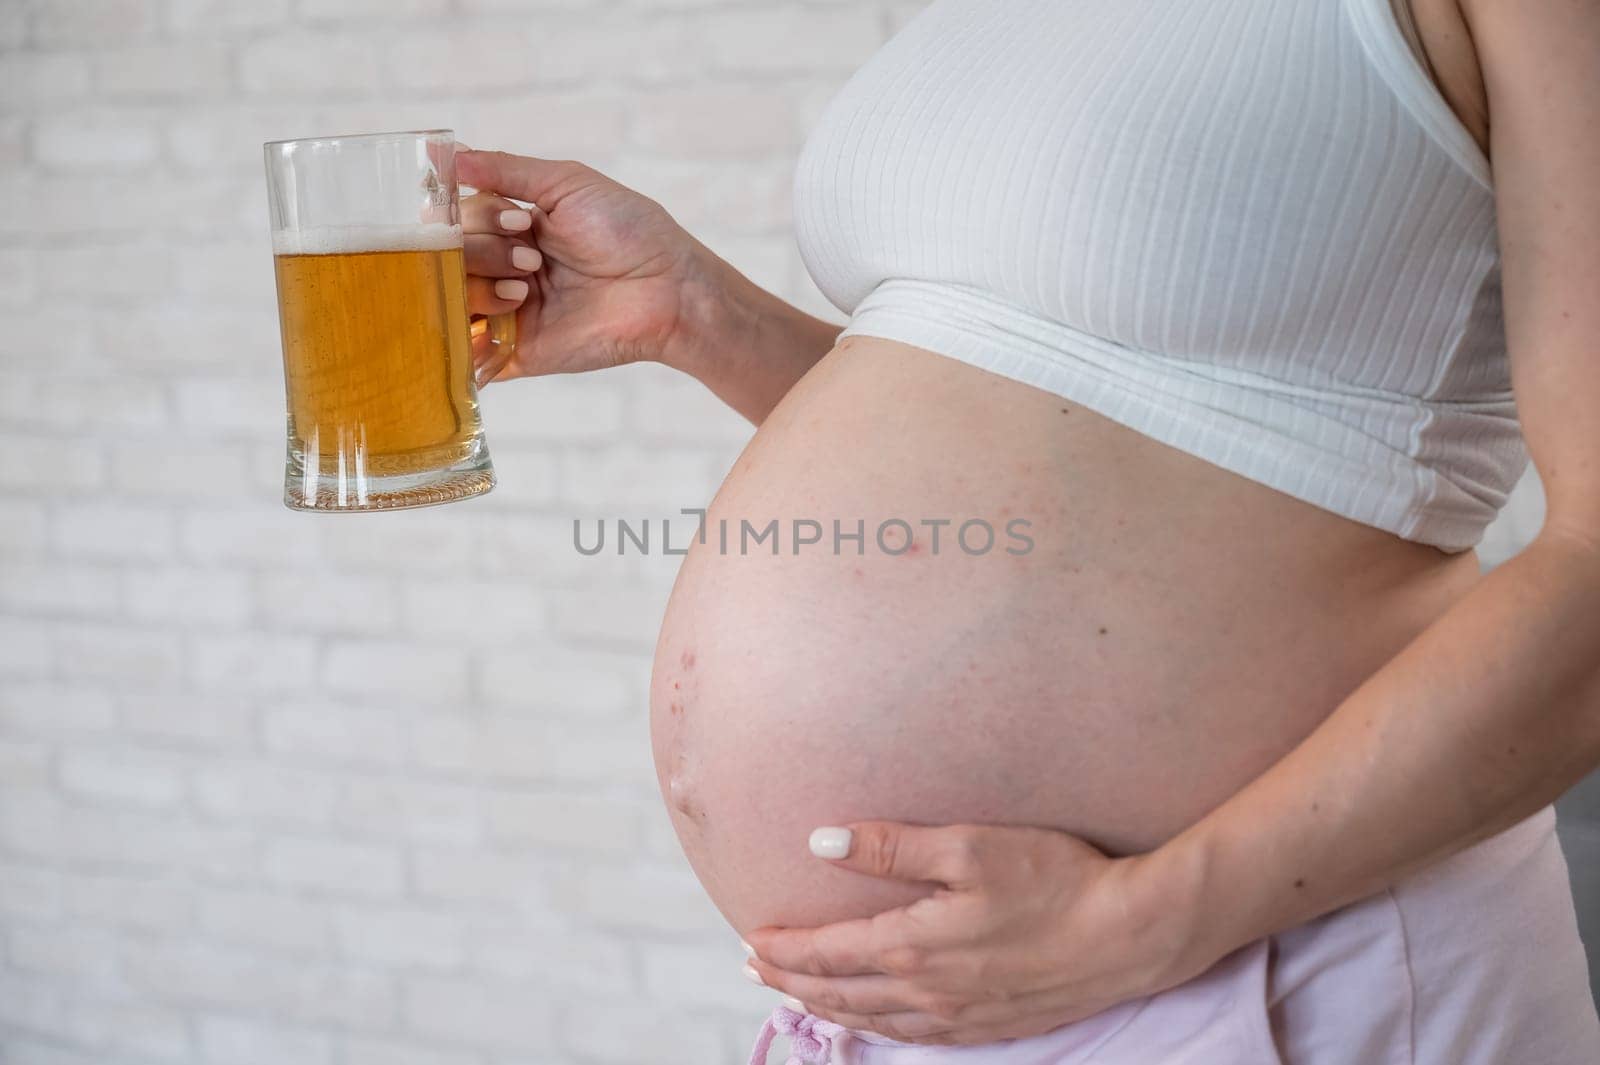 Faceless pregnant woman with rash on stomach holding glass of beer. by mrwed54